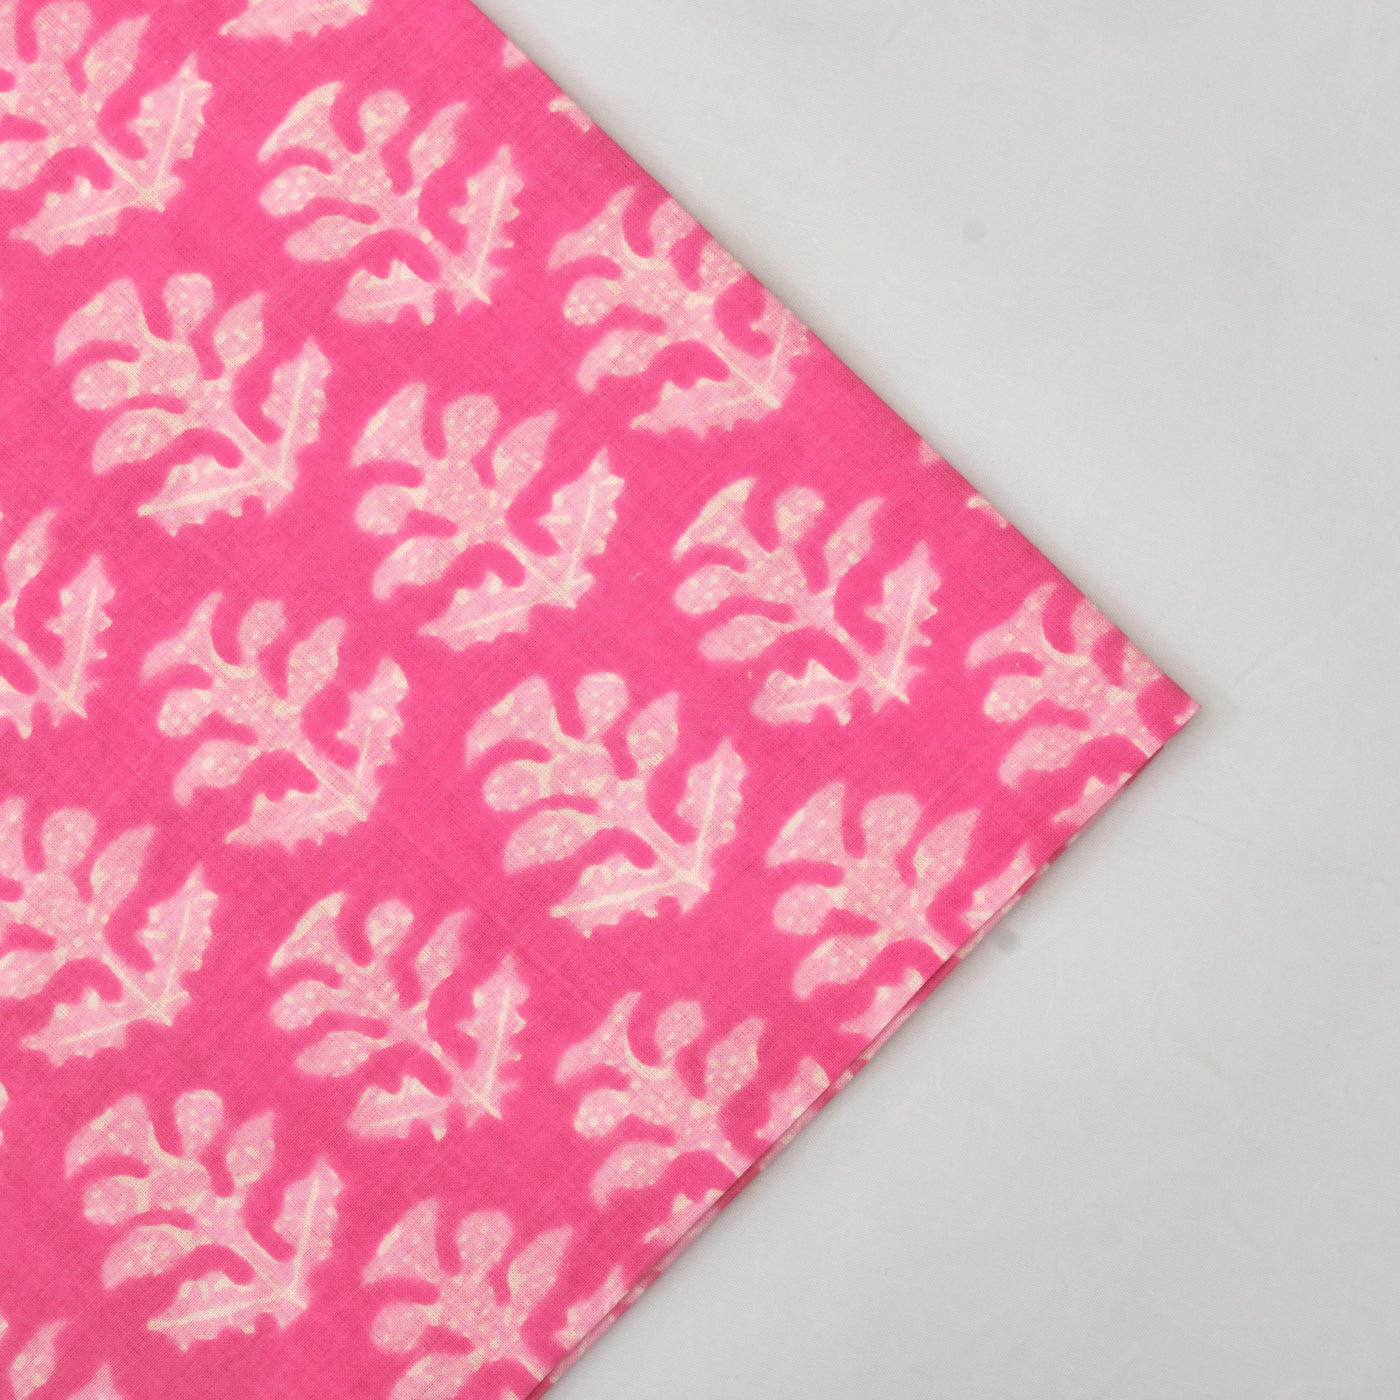 Watermelon and Lemonade Pink  Indian Floral Hand Block Printed Pure Pure Cotton Cloth Napkins, 18x18"Cocktail Napkin, 20x20" Dinner Napkins